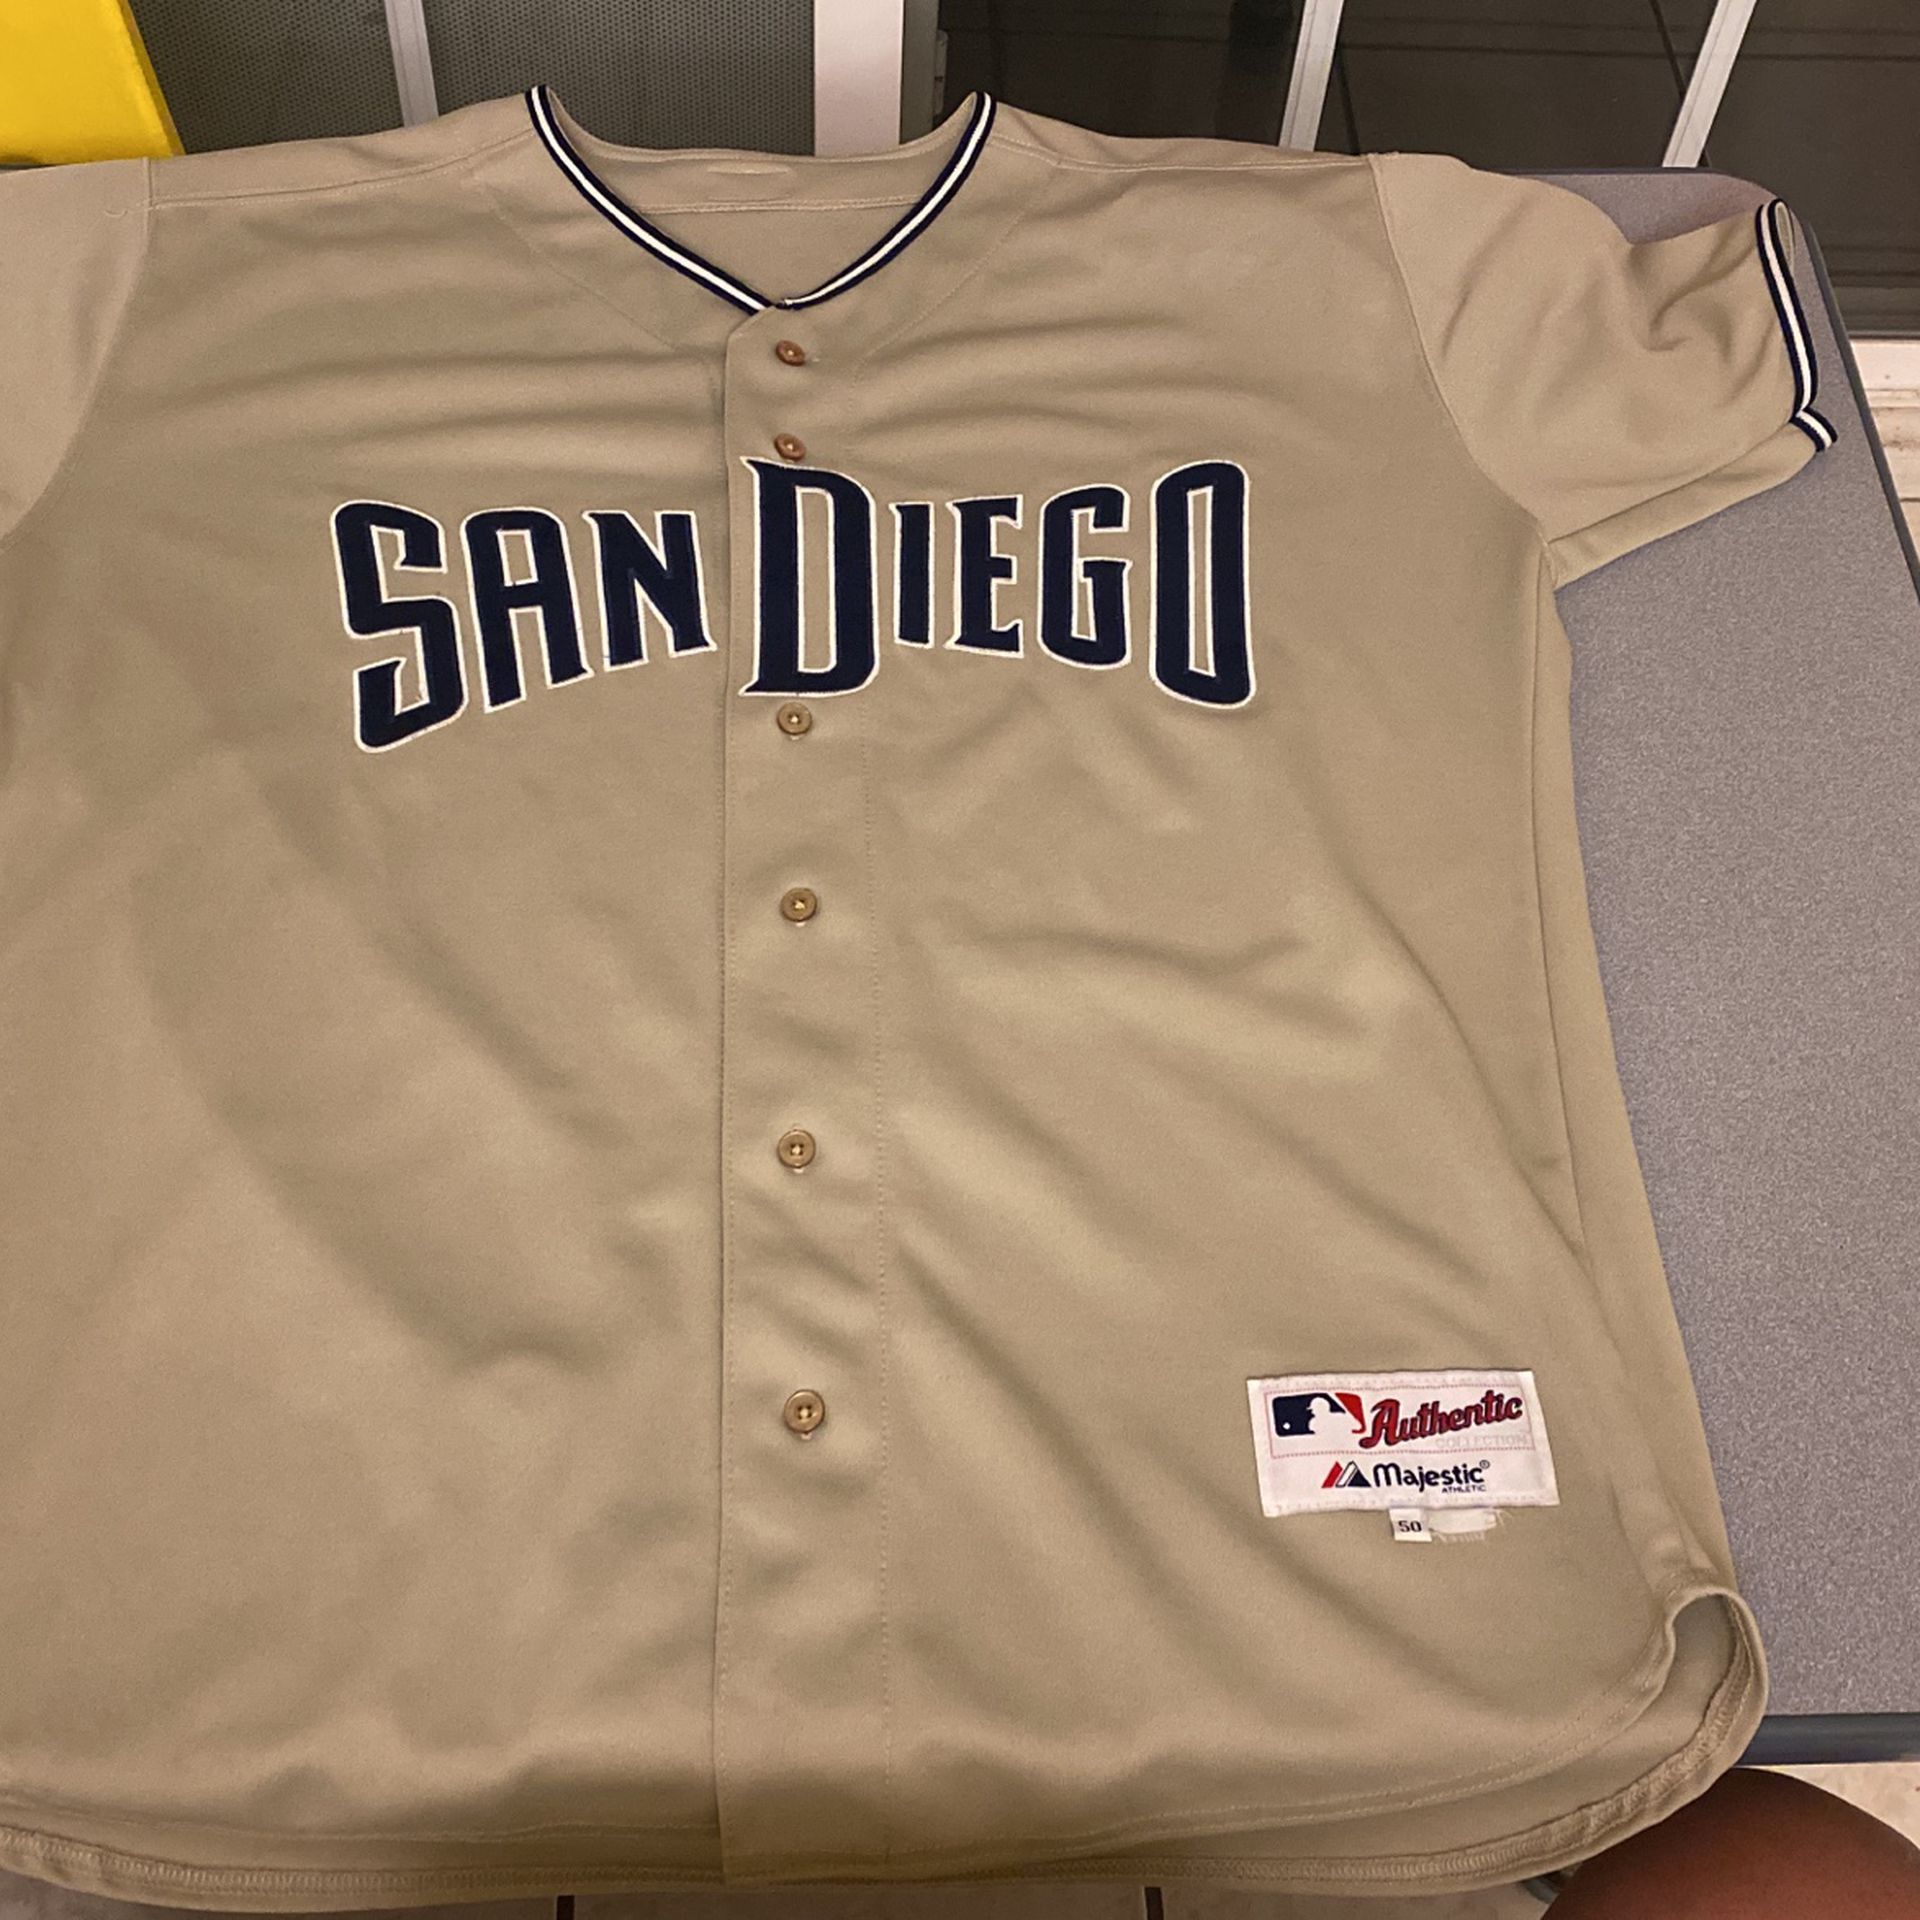 padres road jersey